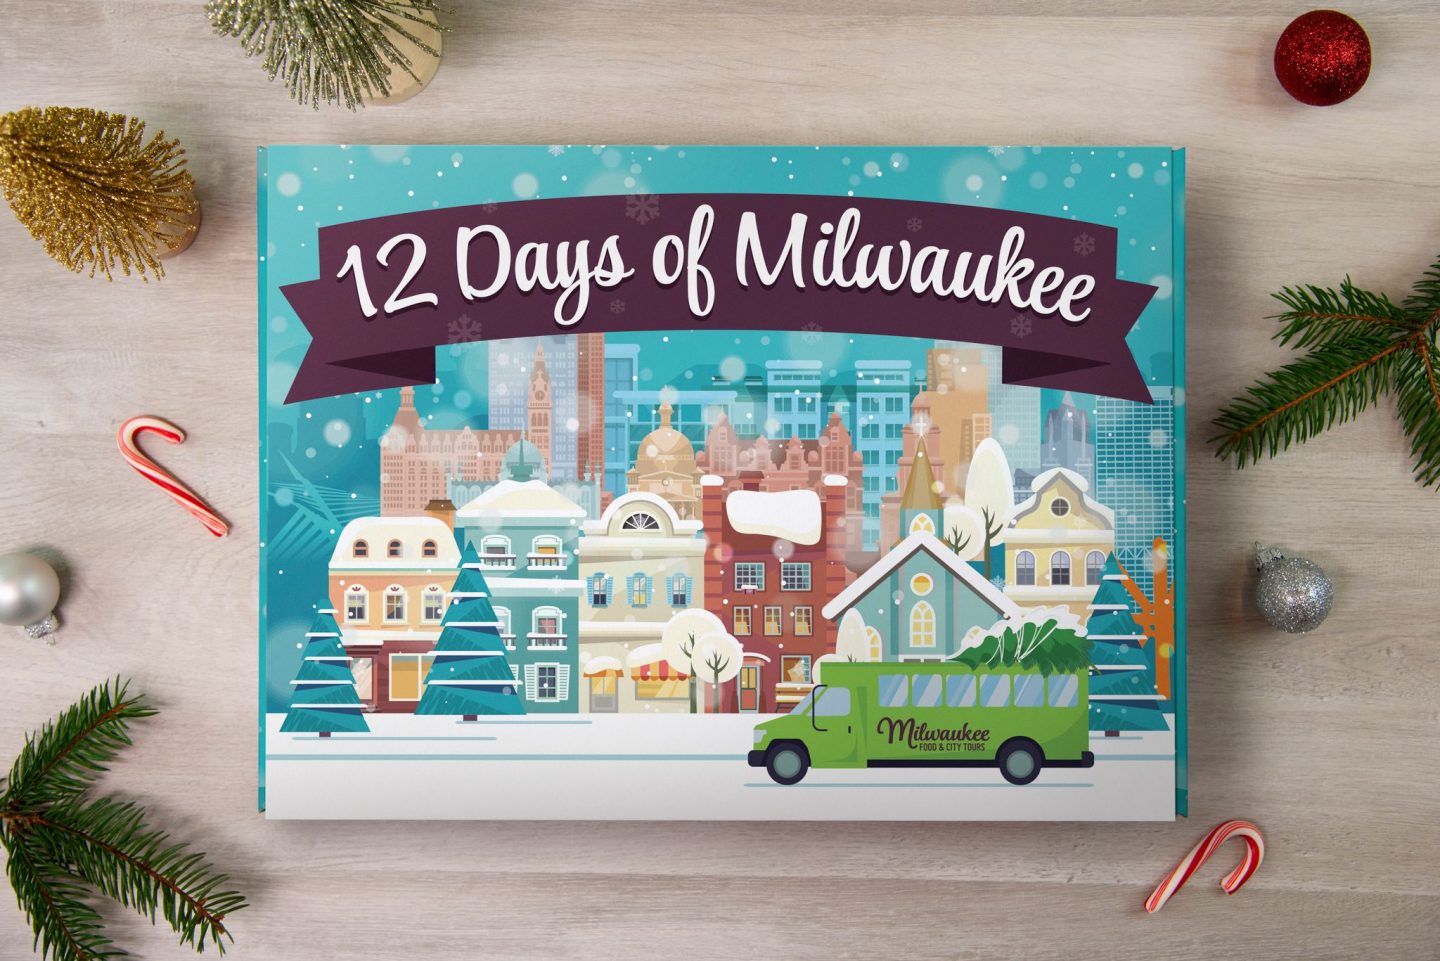 Milwaukee Food & City Tours to Bring the Spirit of Christmas to